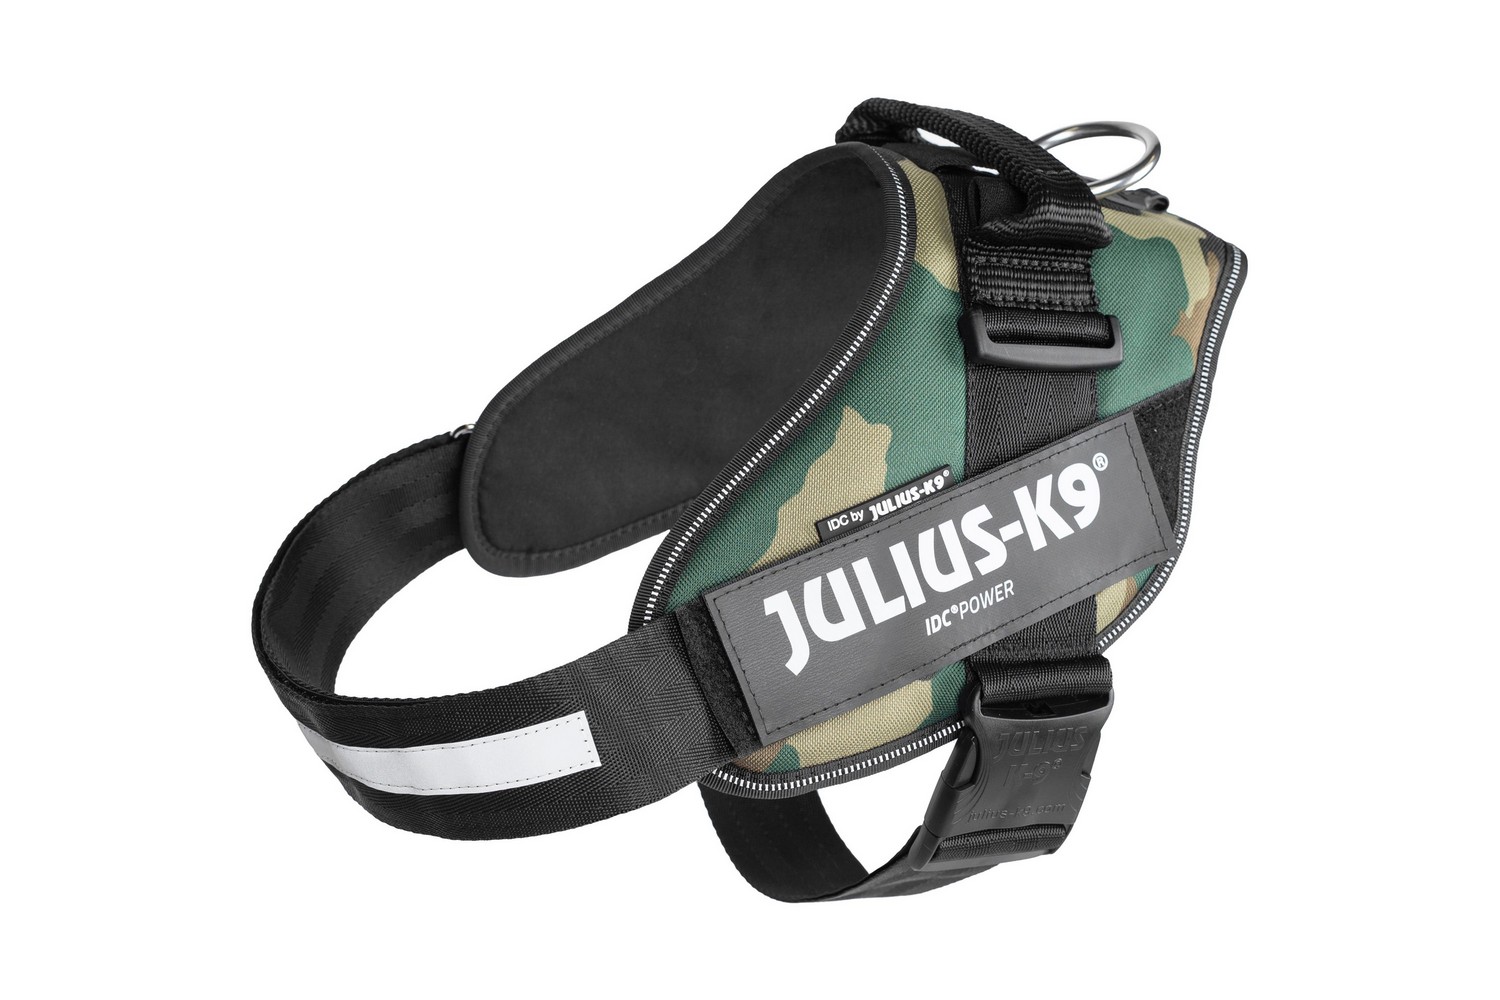 Buy Julius-K9 IDC Harness Camo for your dog